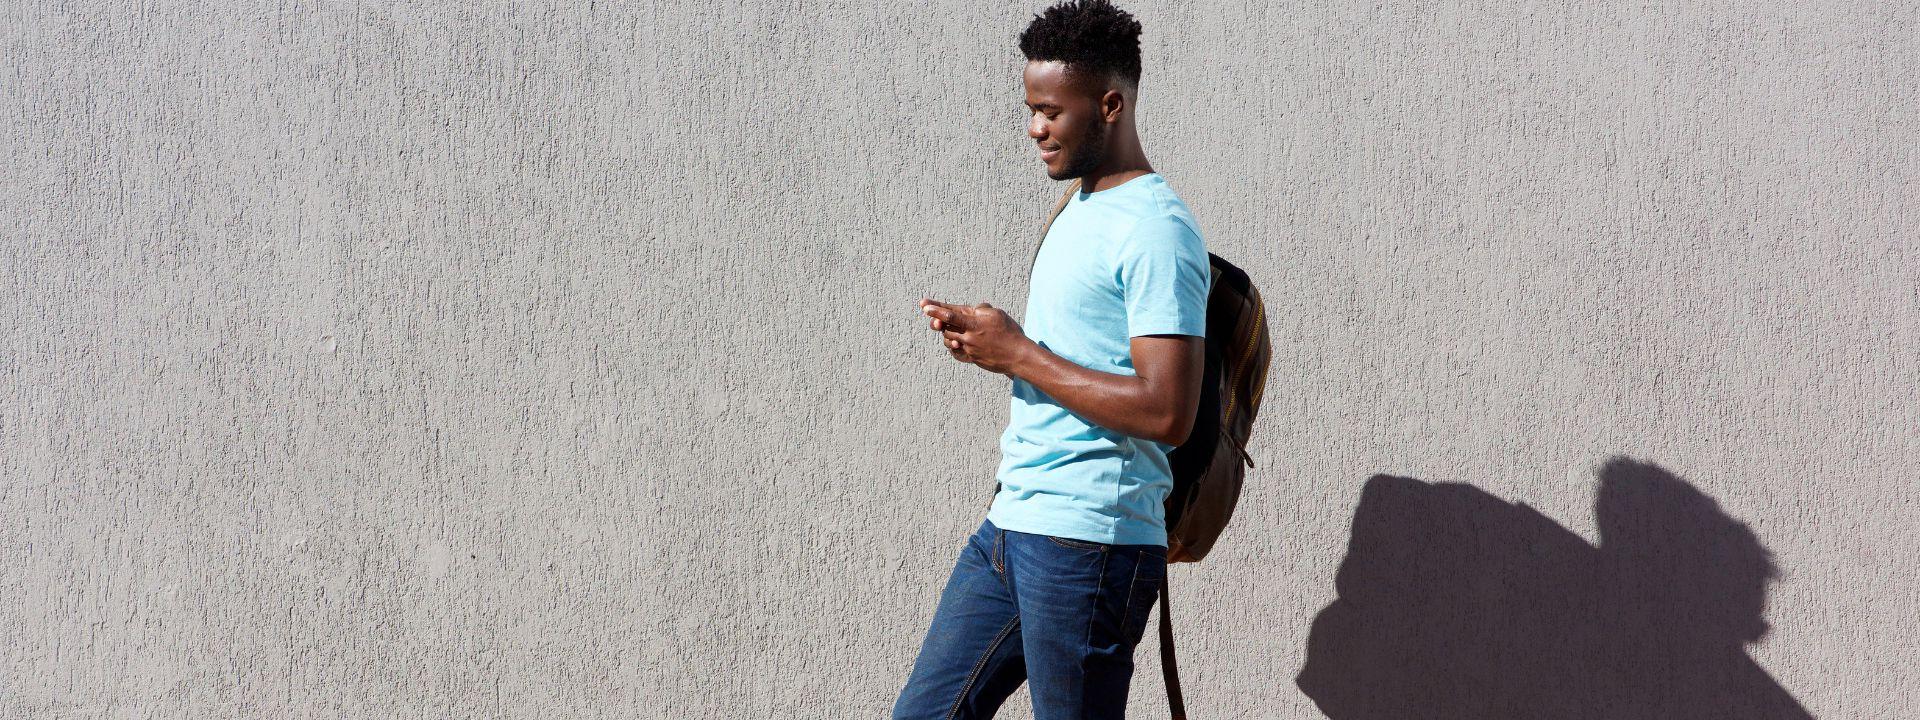 Male Student on phone